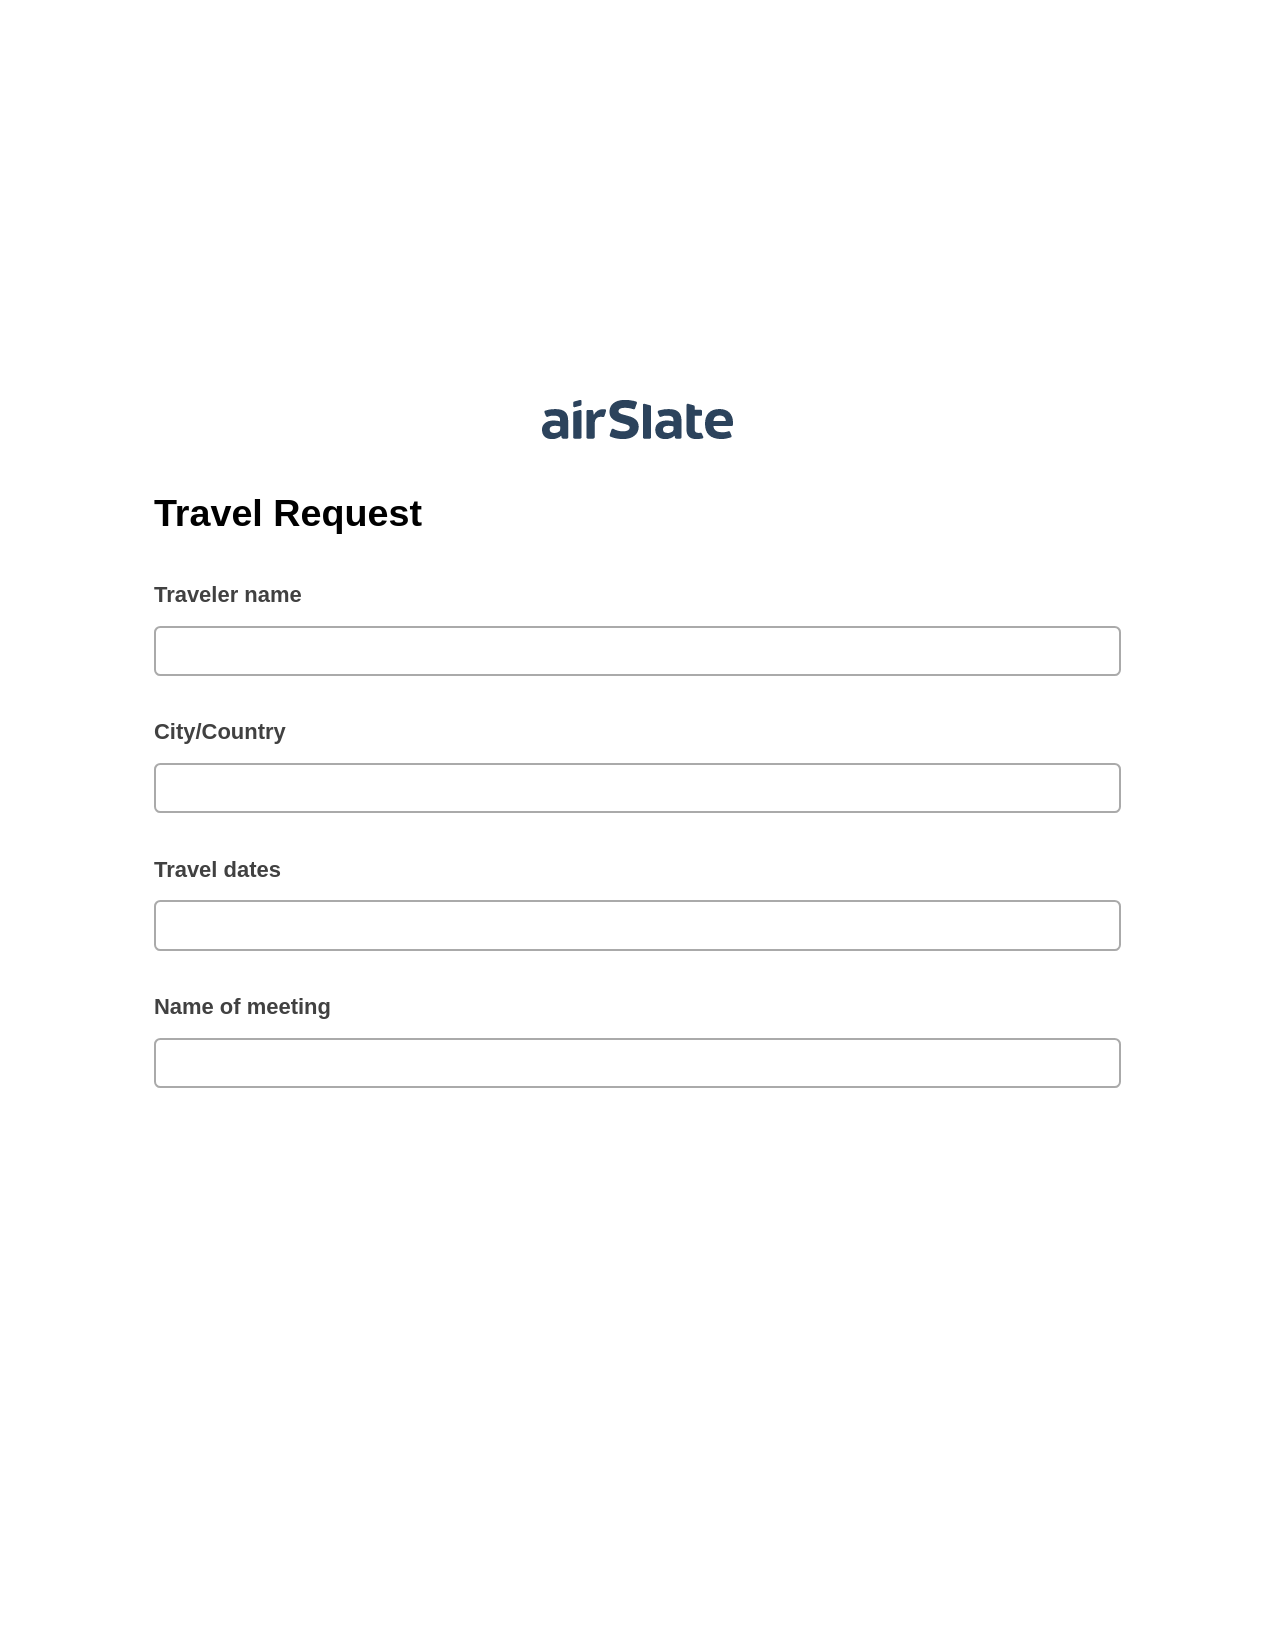 Travel Request Pre-fill Slate from MS Dynamics 365 Records Bot, Add Tags to Slate Bot, Export to Excel 365 Bot